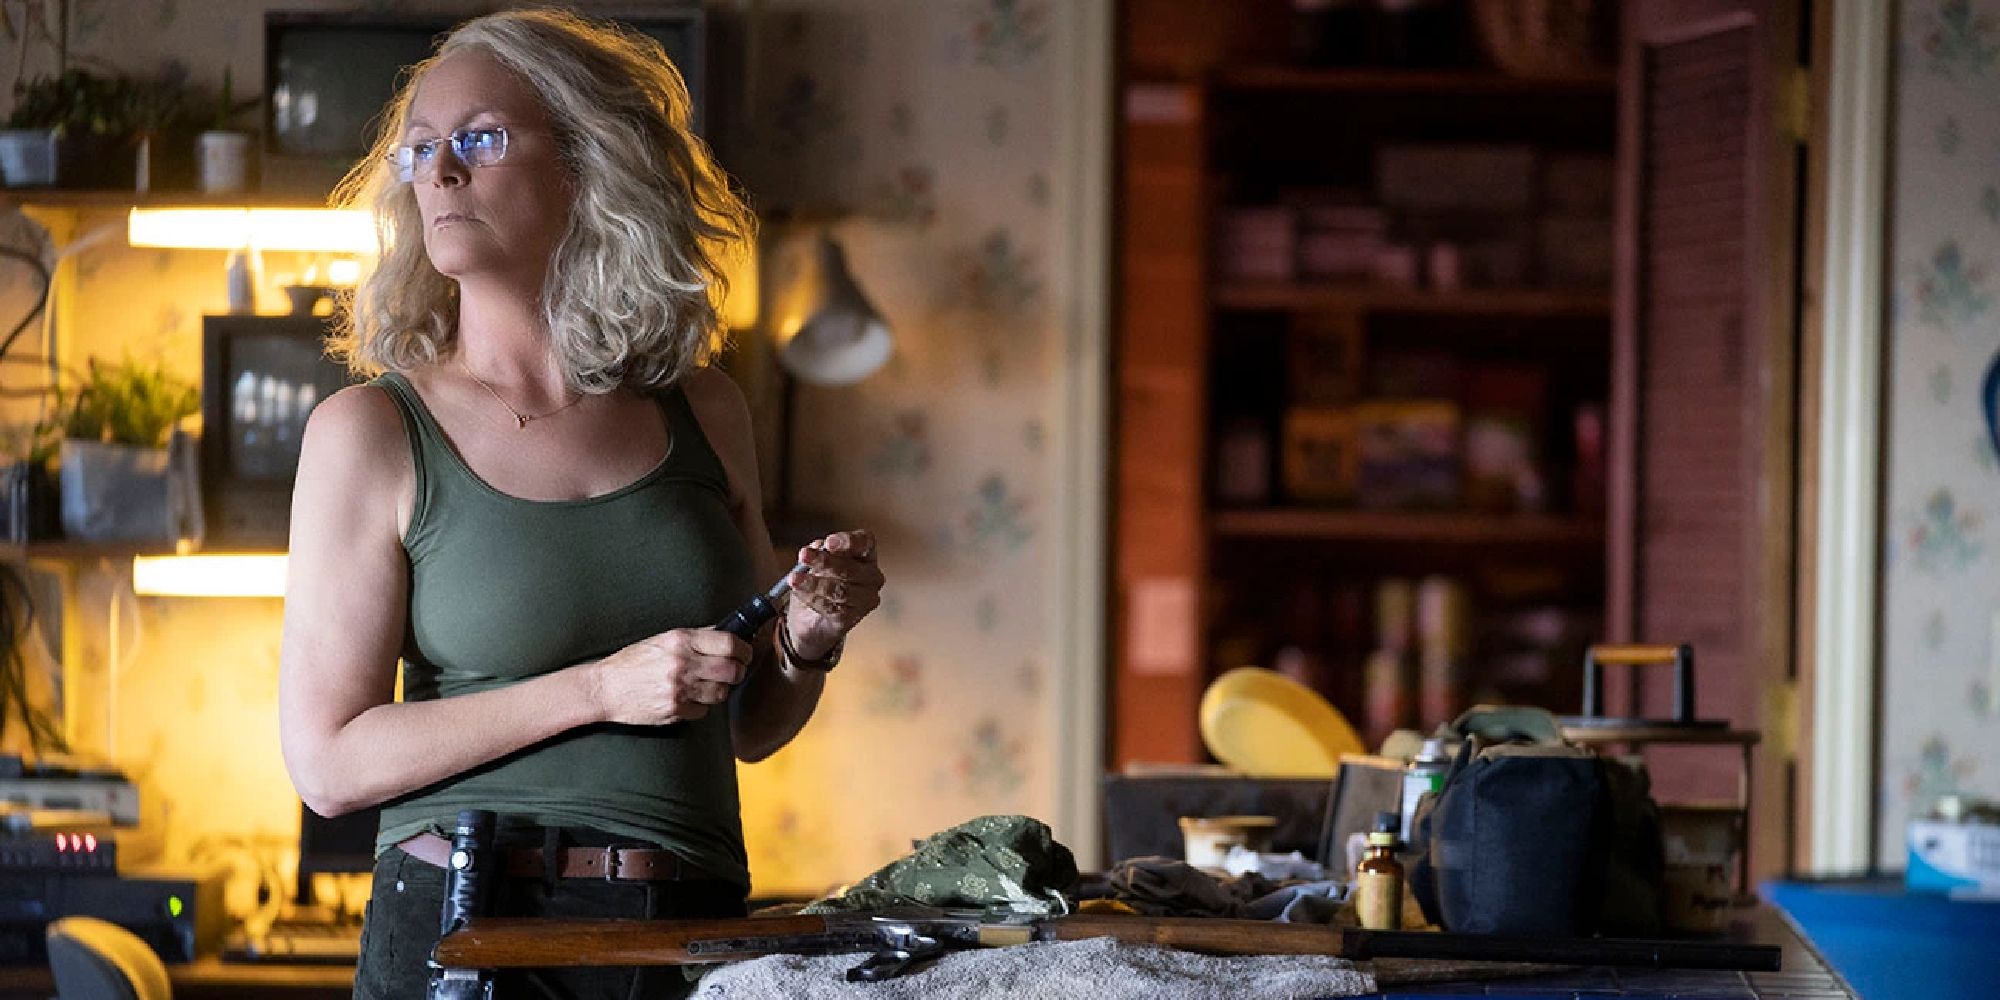 Jamie Lee Curtis starring as an older Laurie, holding a knife as she looks off to one side.